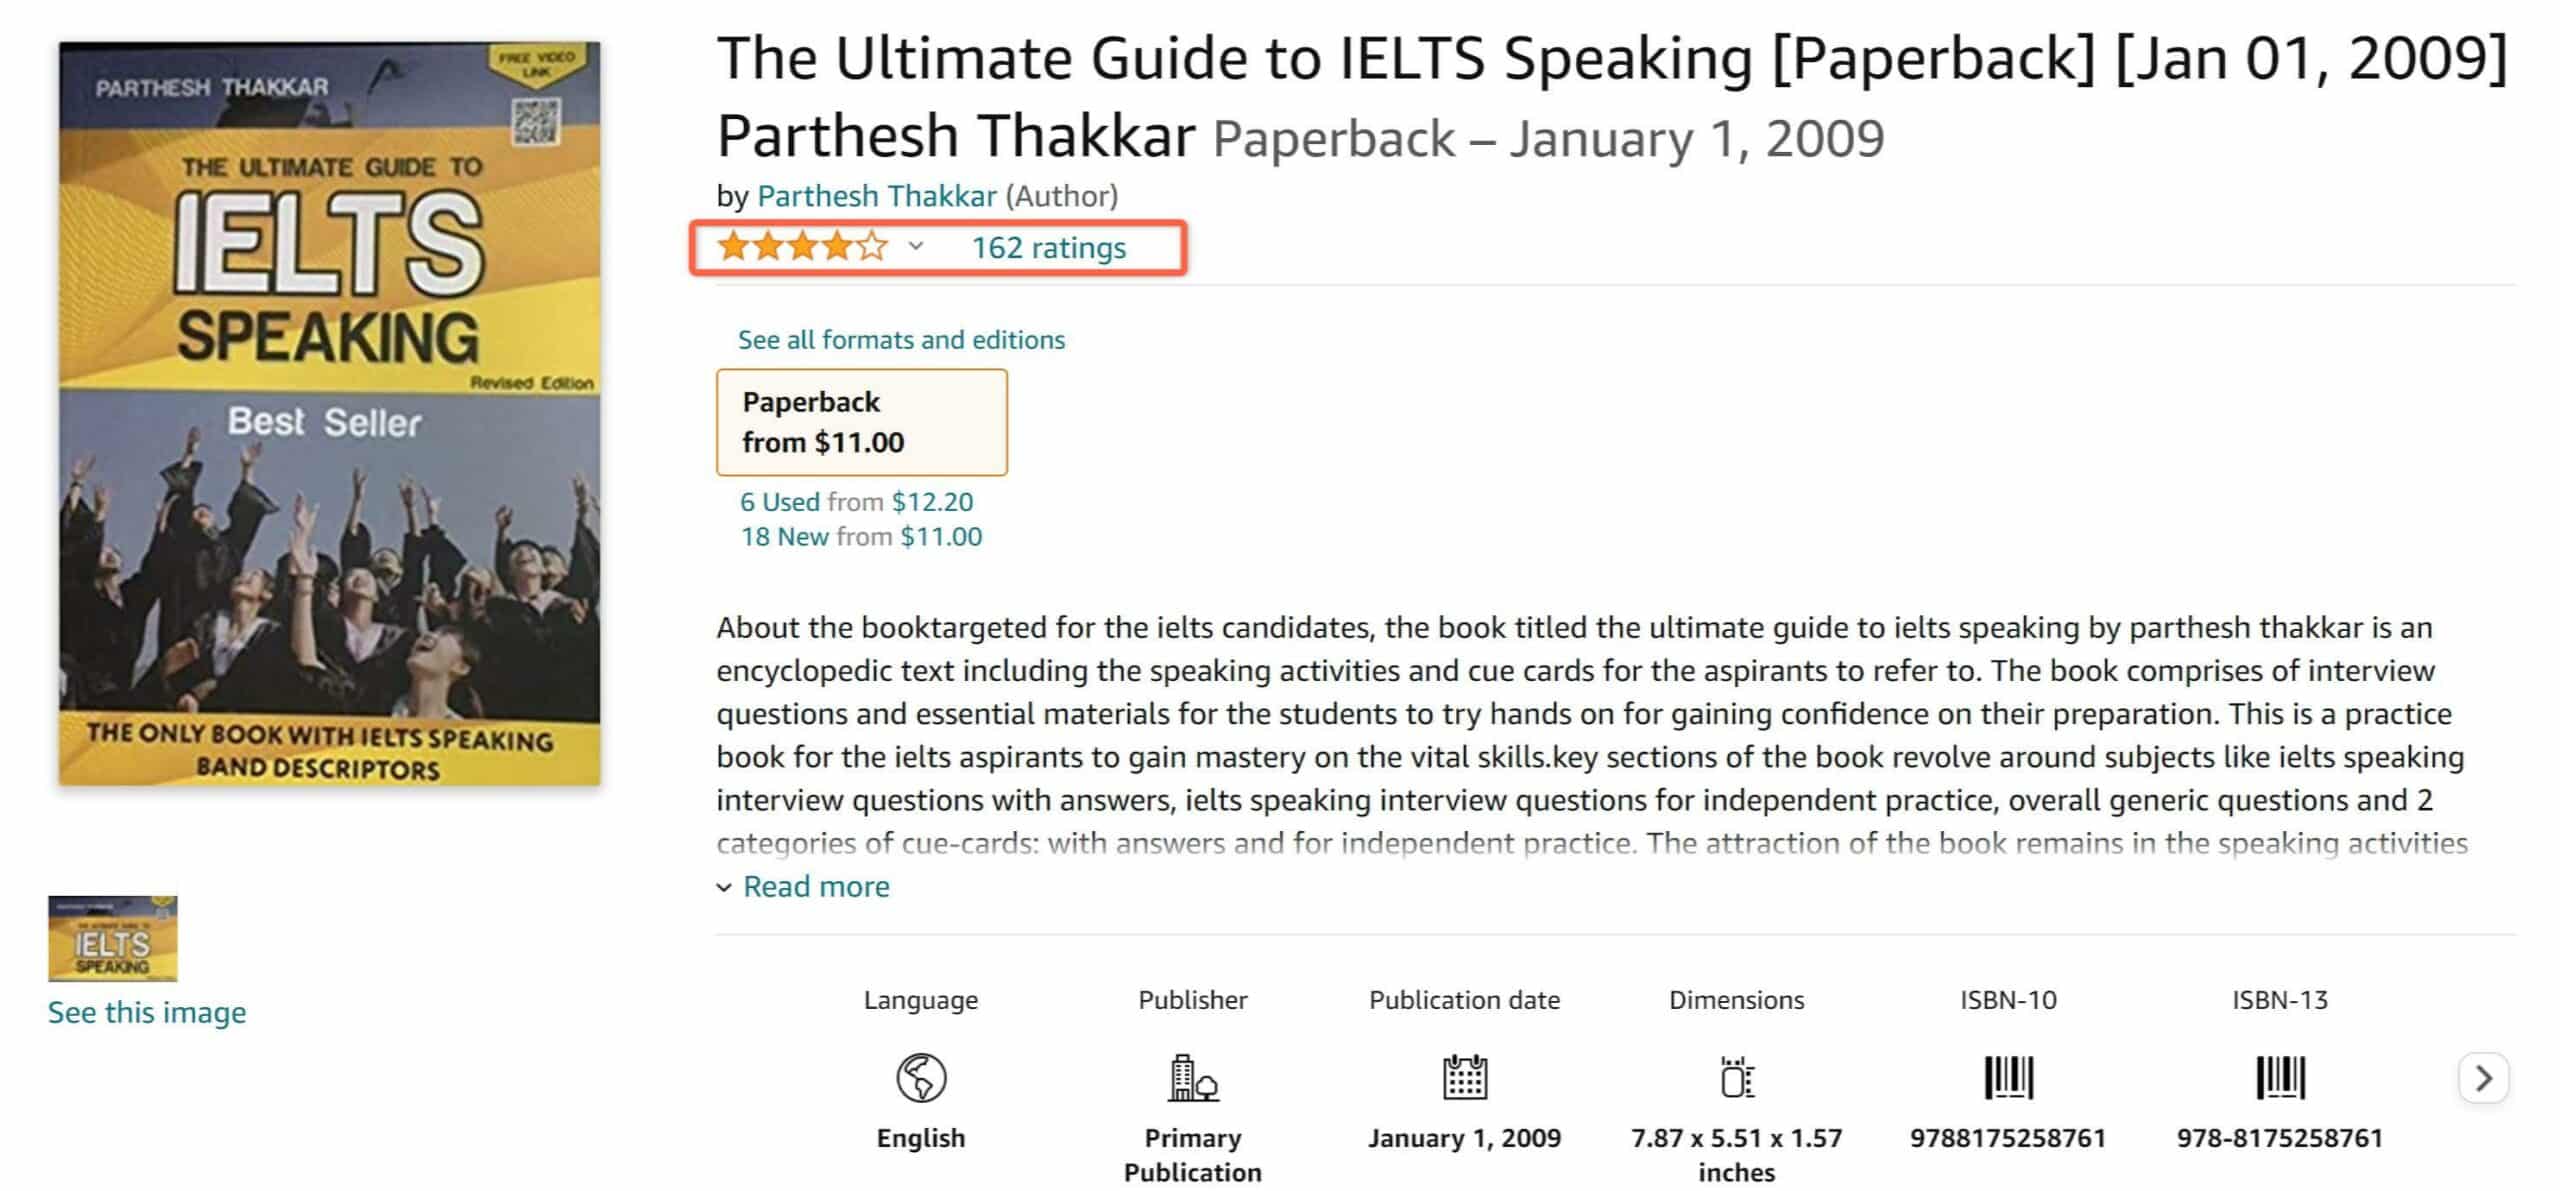 The Ultimate Guide to IELTS Speaking Amazon 1